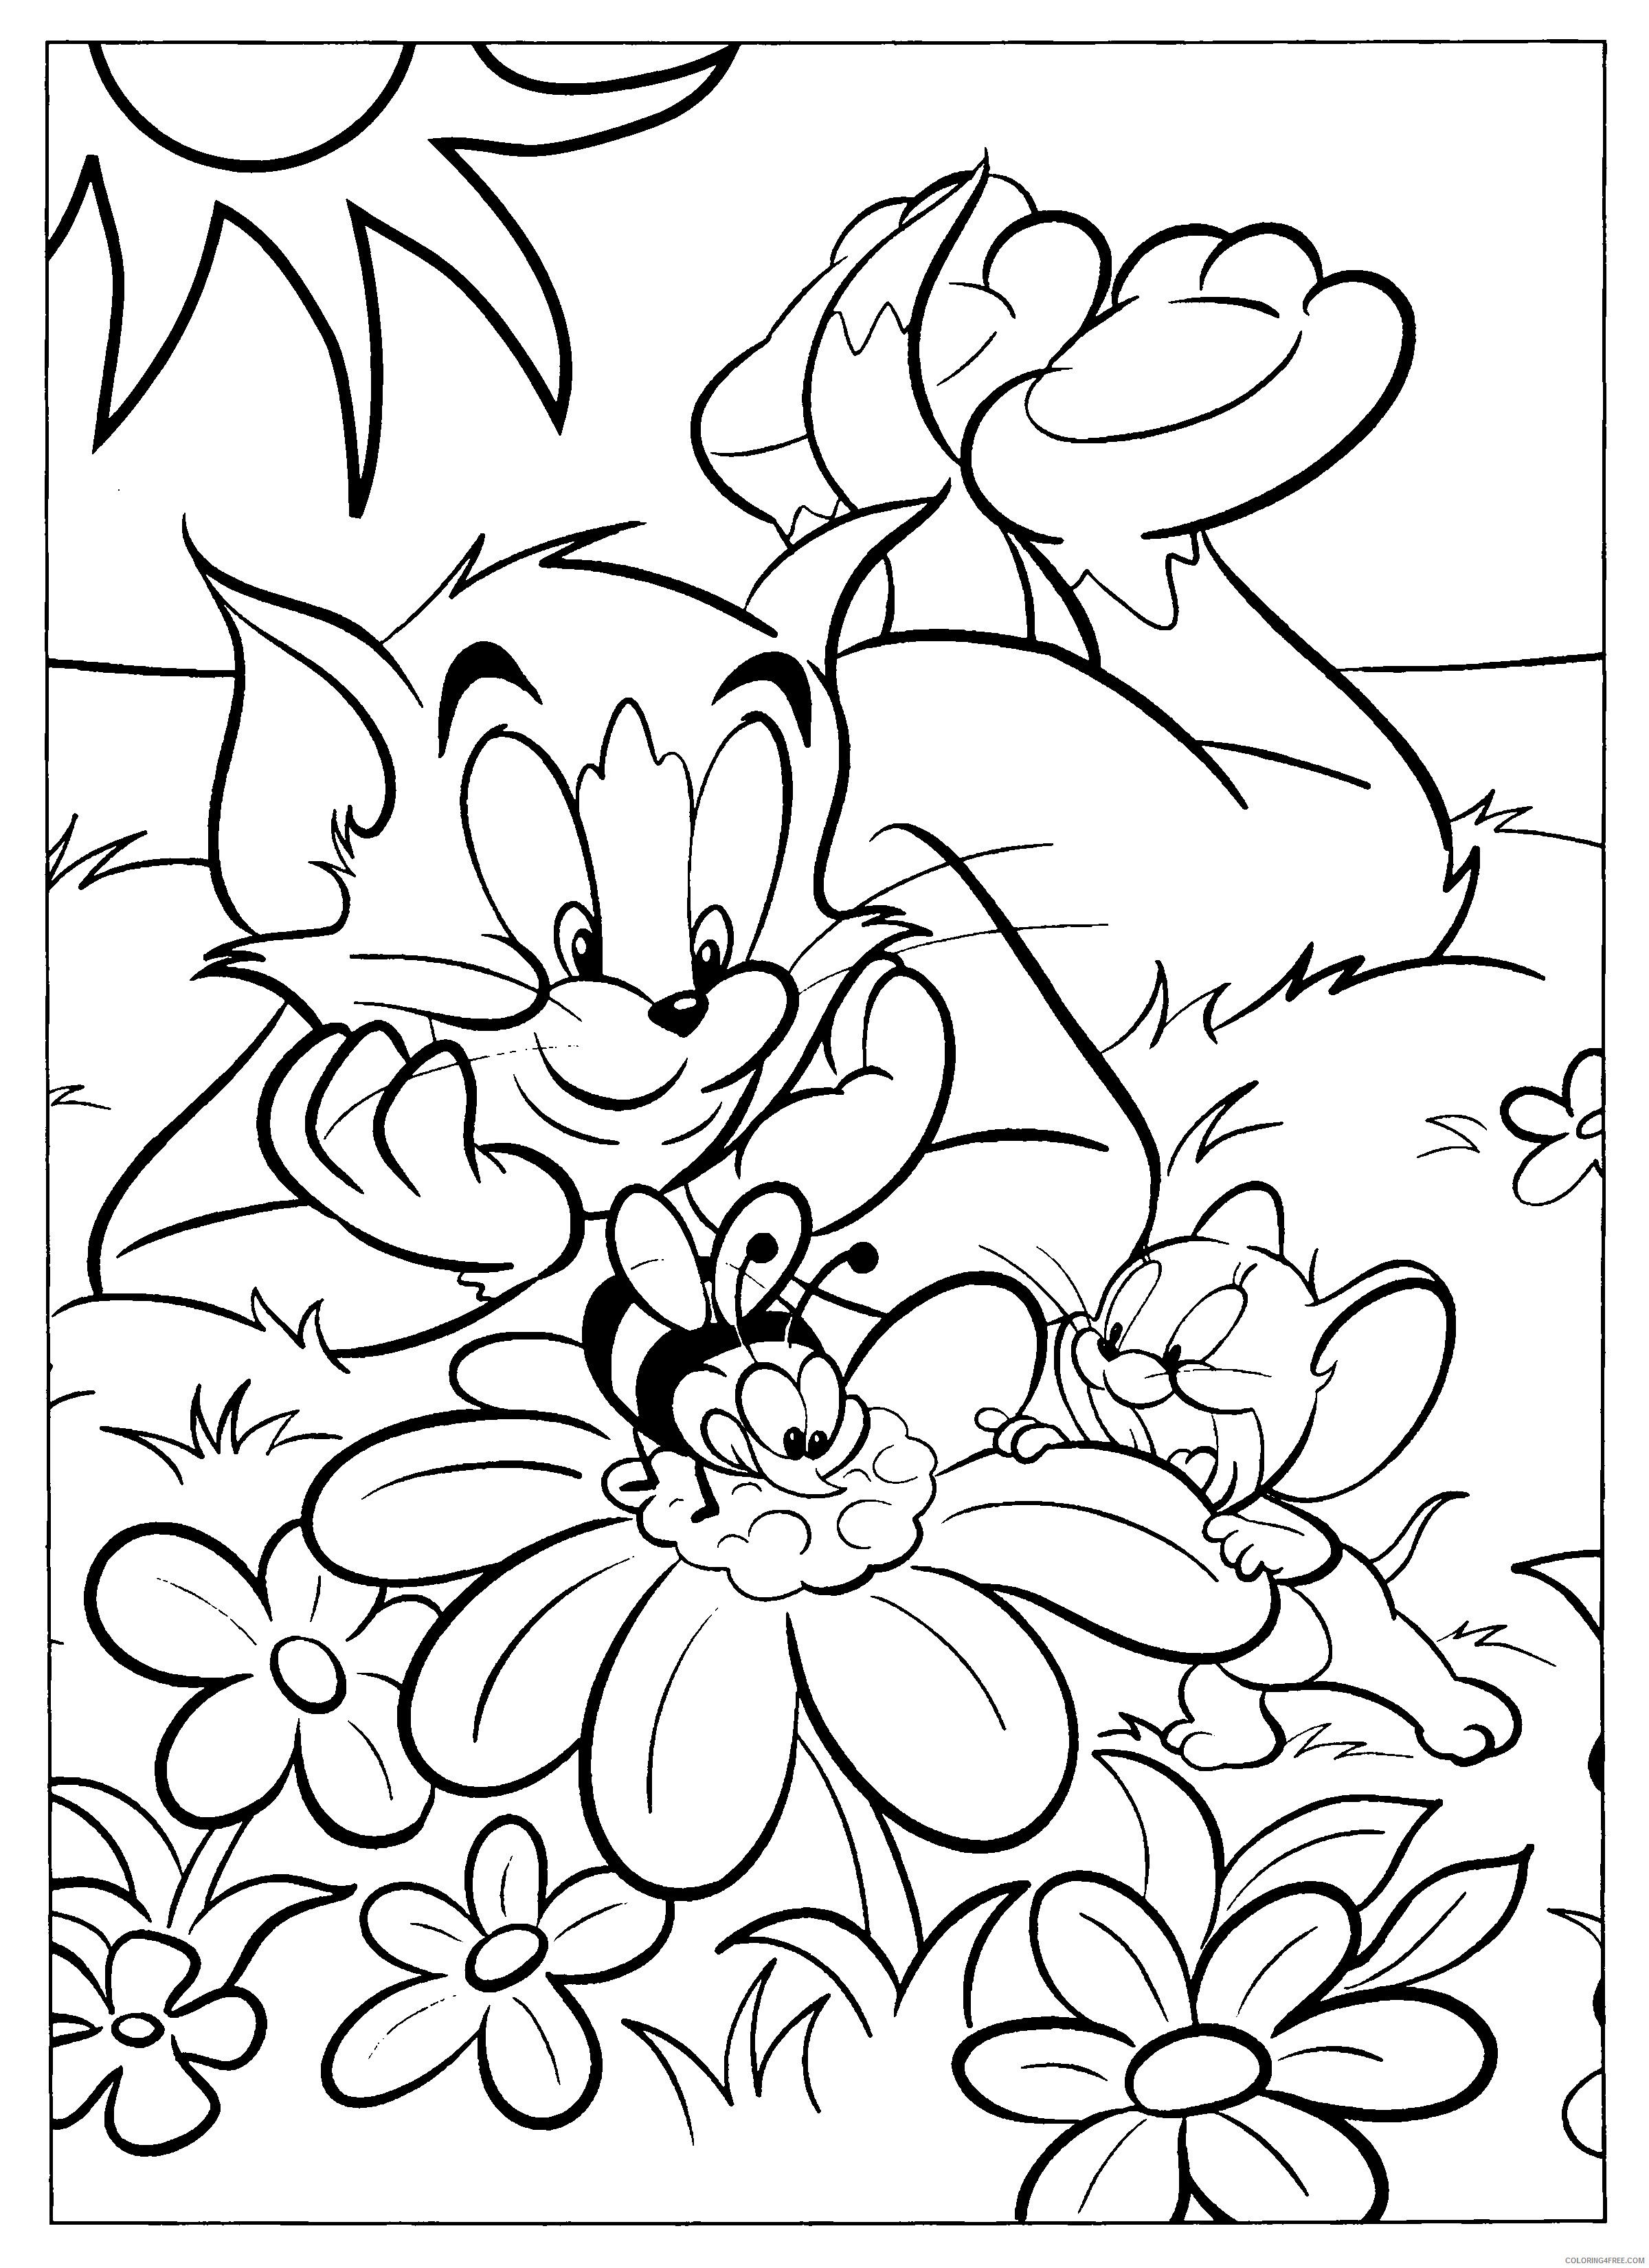 Tom and Jerry Coloring Pages Printable Coloring4free